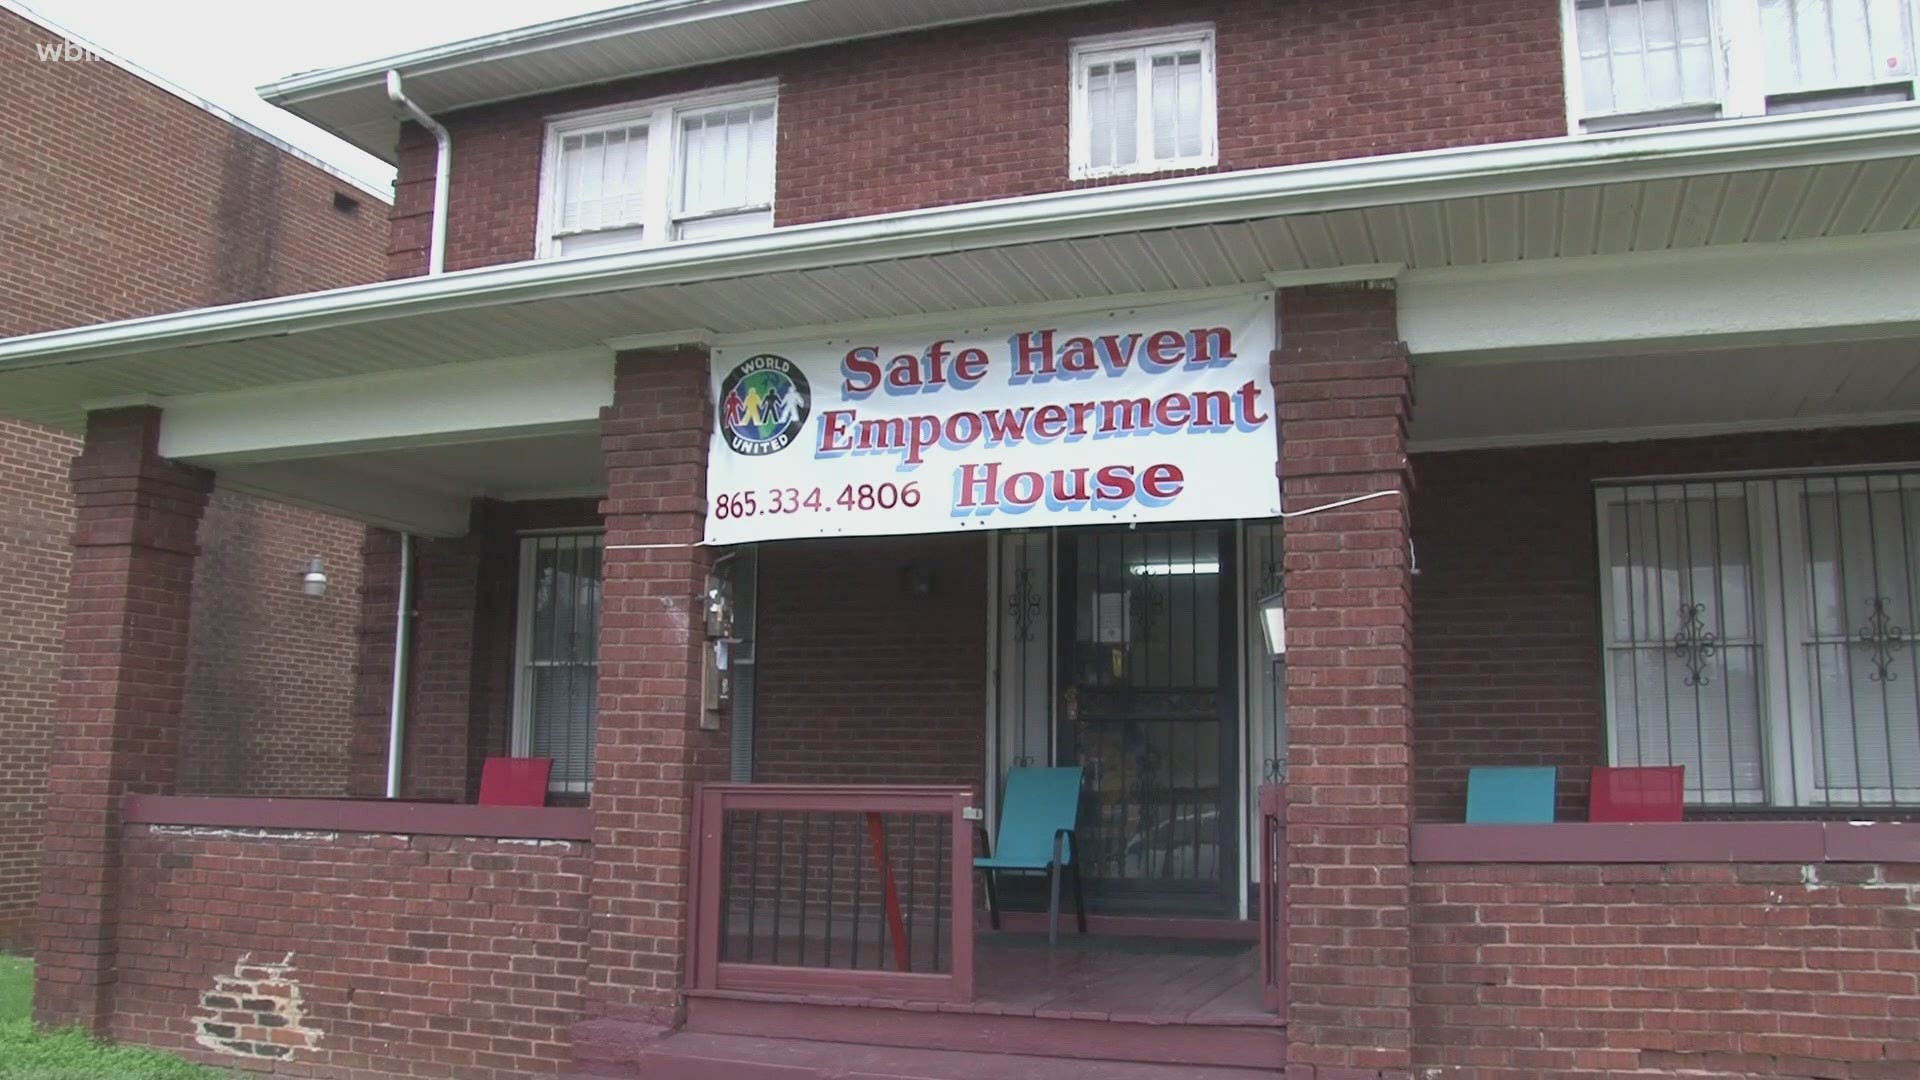 Safe Haven is putting feet on the streets, meeting kids where they are and curb gun violence across Knoxville.